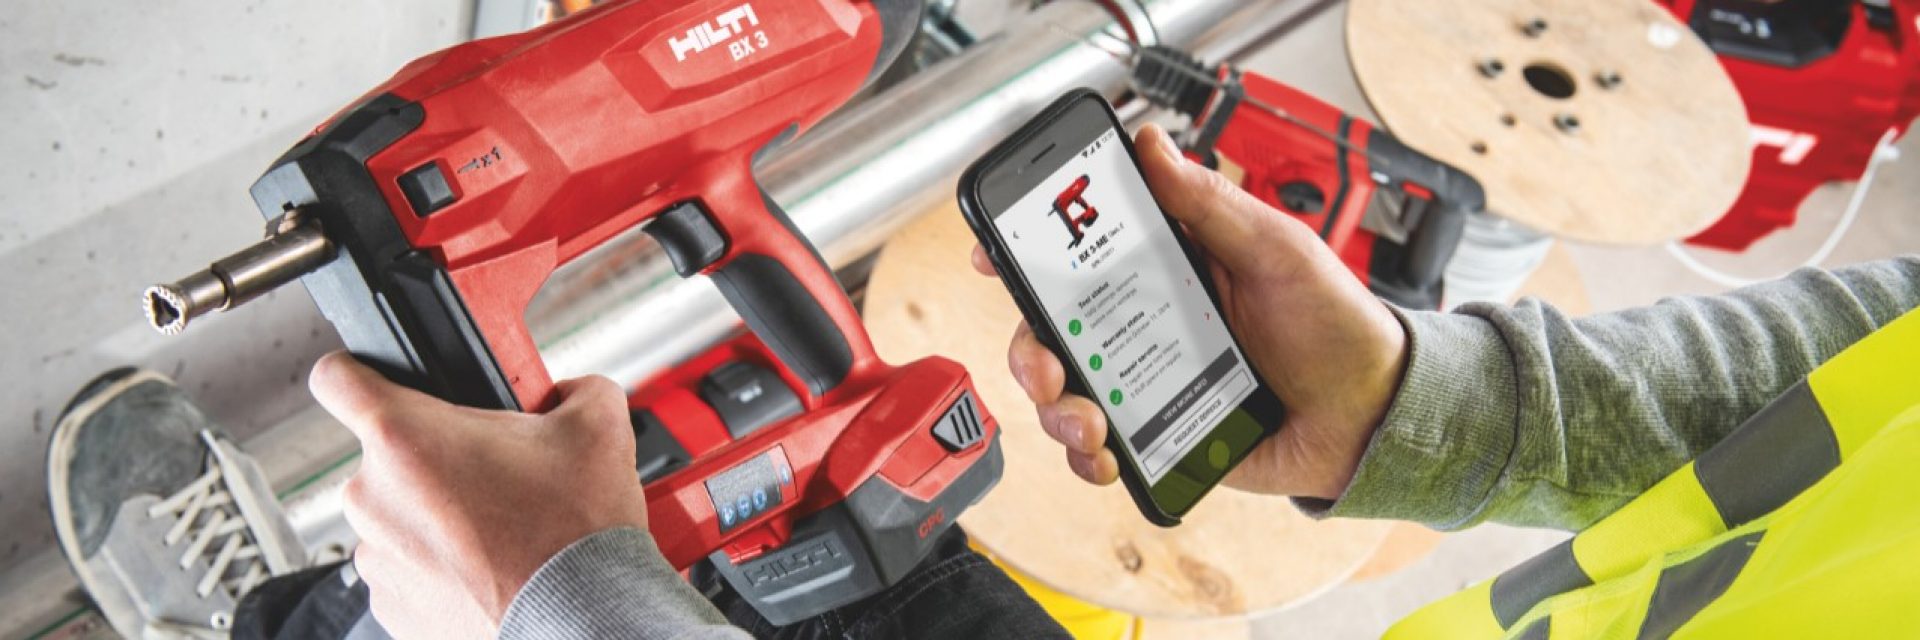 Hilti Connect App brings hassle-free tool services to your fingertips